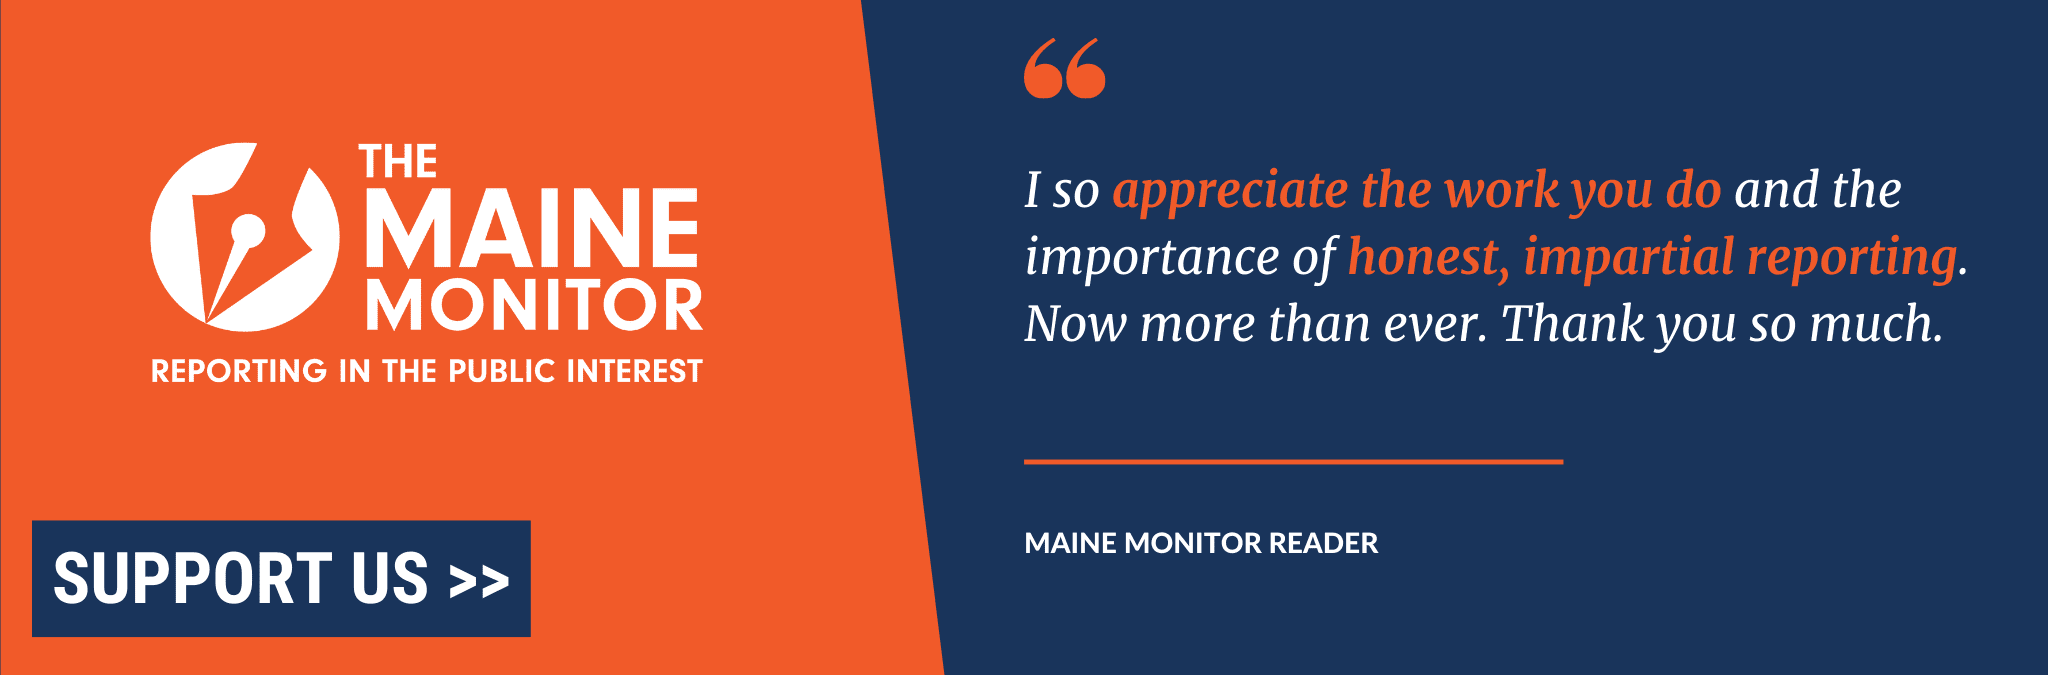 A graphic seeking donations. A quote from a Maine Monitor reader says "I so appreciate the work you do and the importance of honest, impartial reporting. Now more than ever. Thank you so much." Also shown is the newsroom's logo and a support us button.